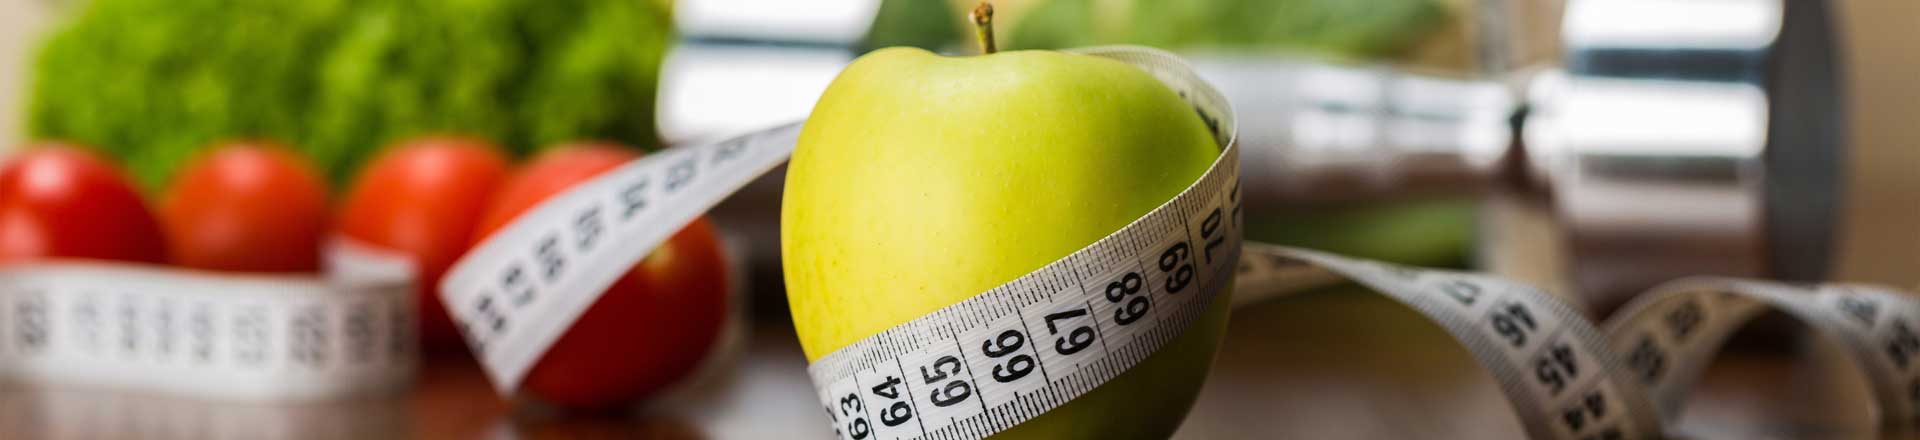 an apple for healthy weight loss common diet myths debunked